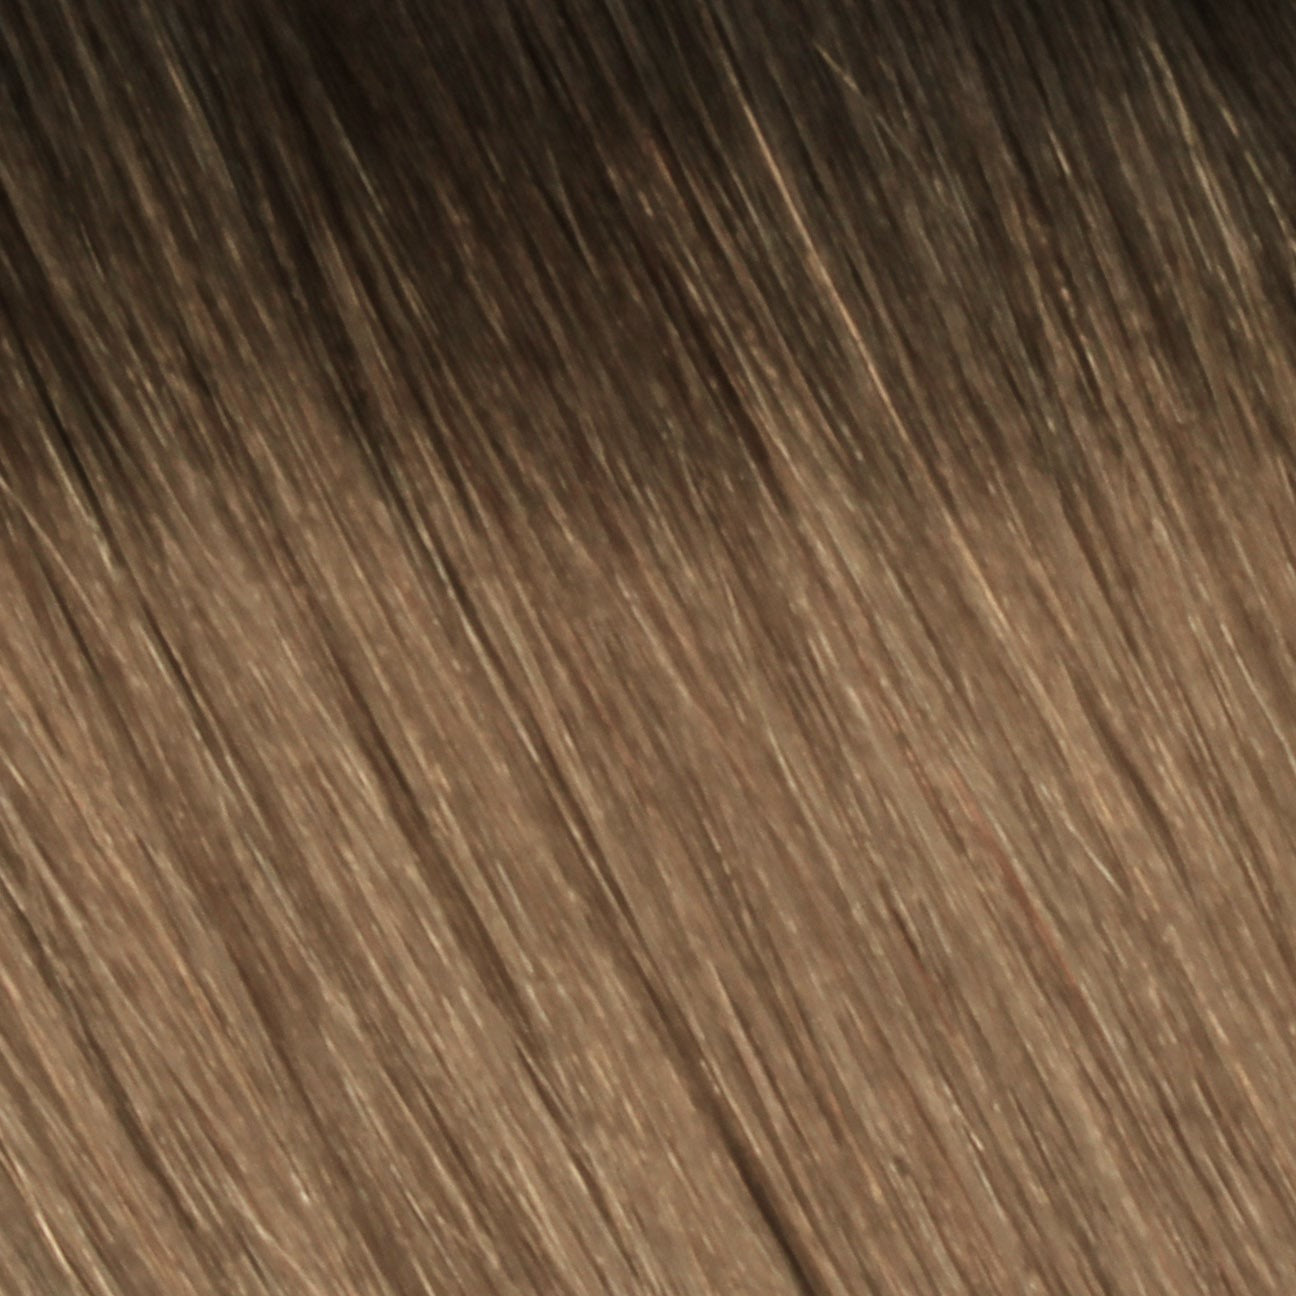 Nano Bonds 18 Inches - SWAY Hair Extensions Rooted-Sunkissed-Brown-R2-8-10 Ultra-fine, invisible bonds for a flawless, natural look. 100% Remy Human hair, lightweight and versatile. Reusable and perfect for individual or salon use.